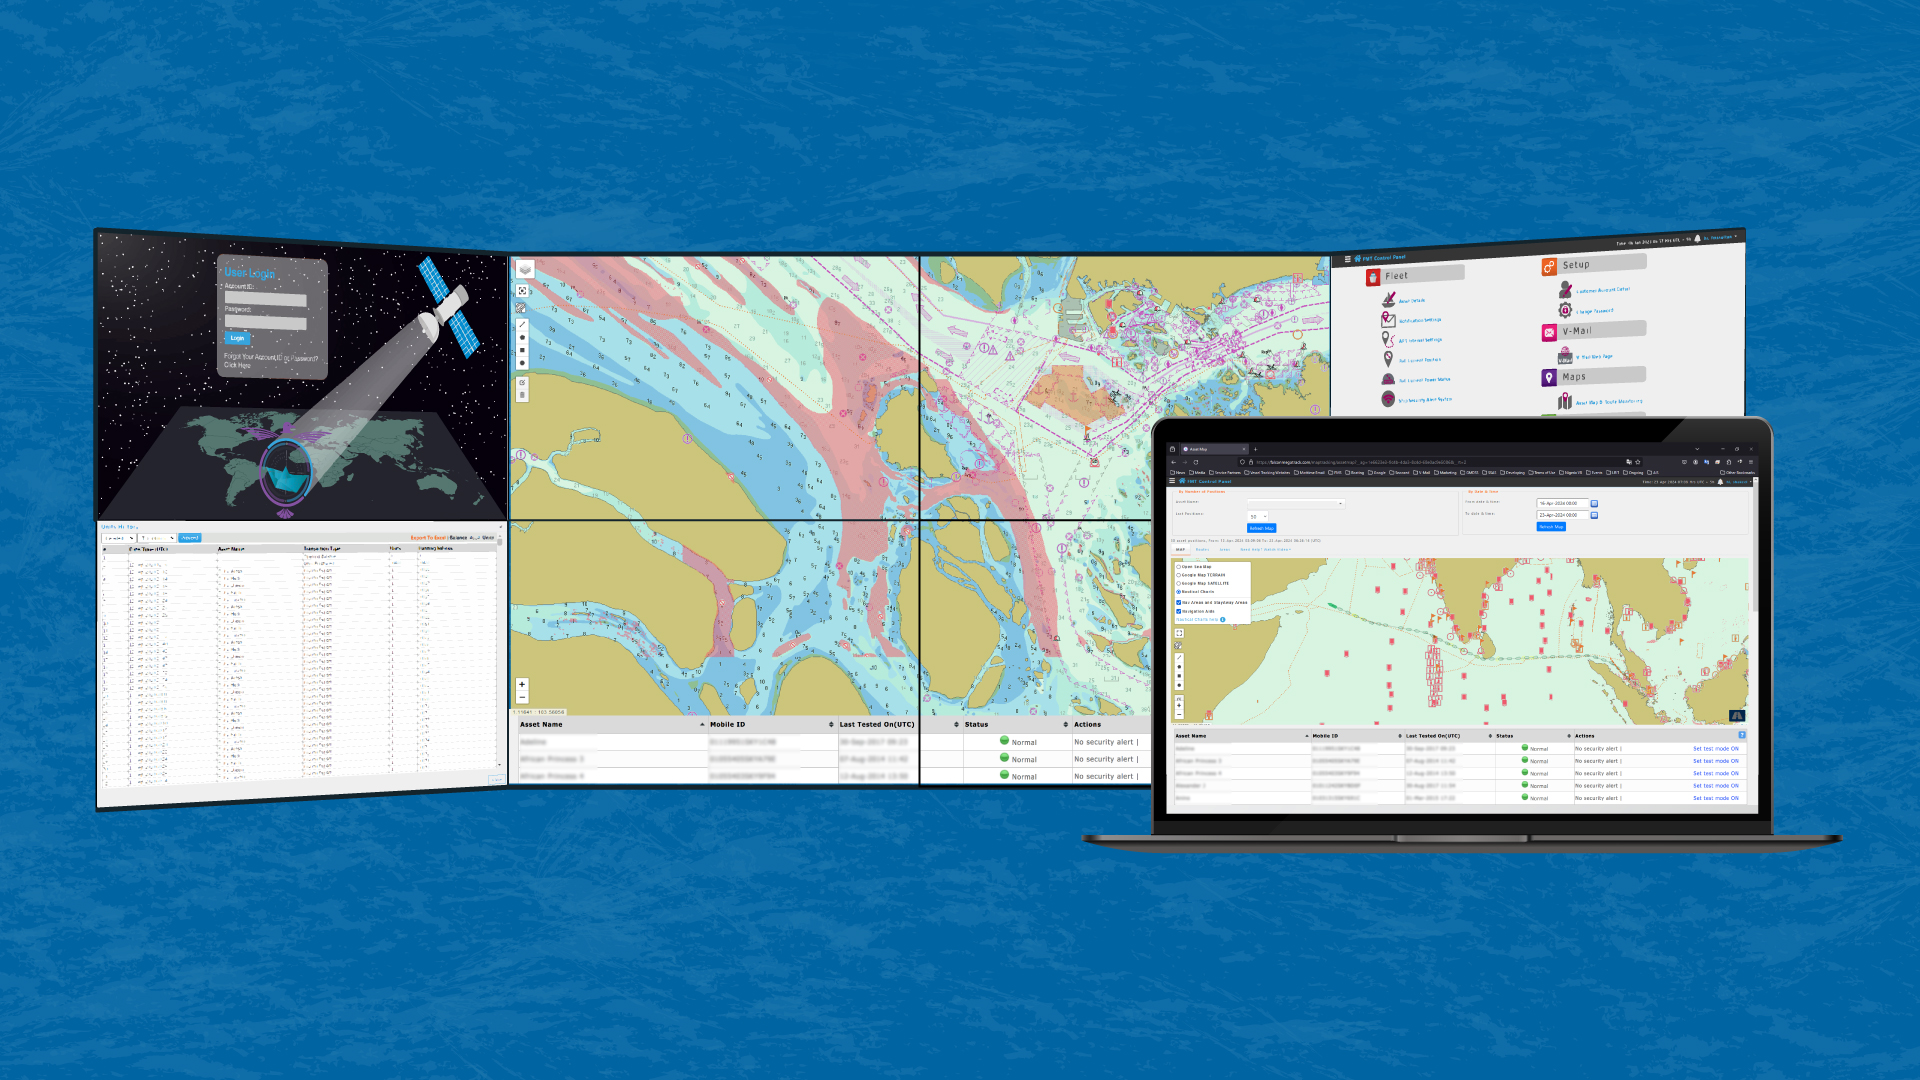 Electronic Nautical Chart is the all essential cartographic reference for ship navigation worldwide. If you are looking for an accurate and thorough map of marine areas, Nautical Chart is the resource you will want by your side. Use the Navigational Charts Legend file to study the chart for port plans and safety depth contours, identify tides & currents, and locate navigation aids, nearby marine services and more!